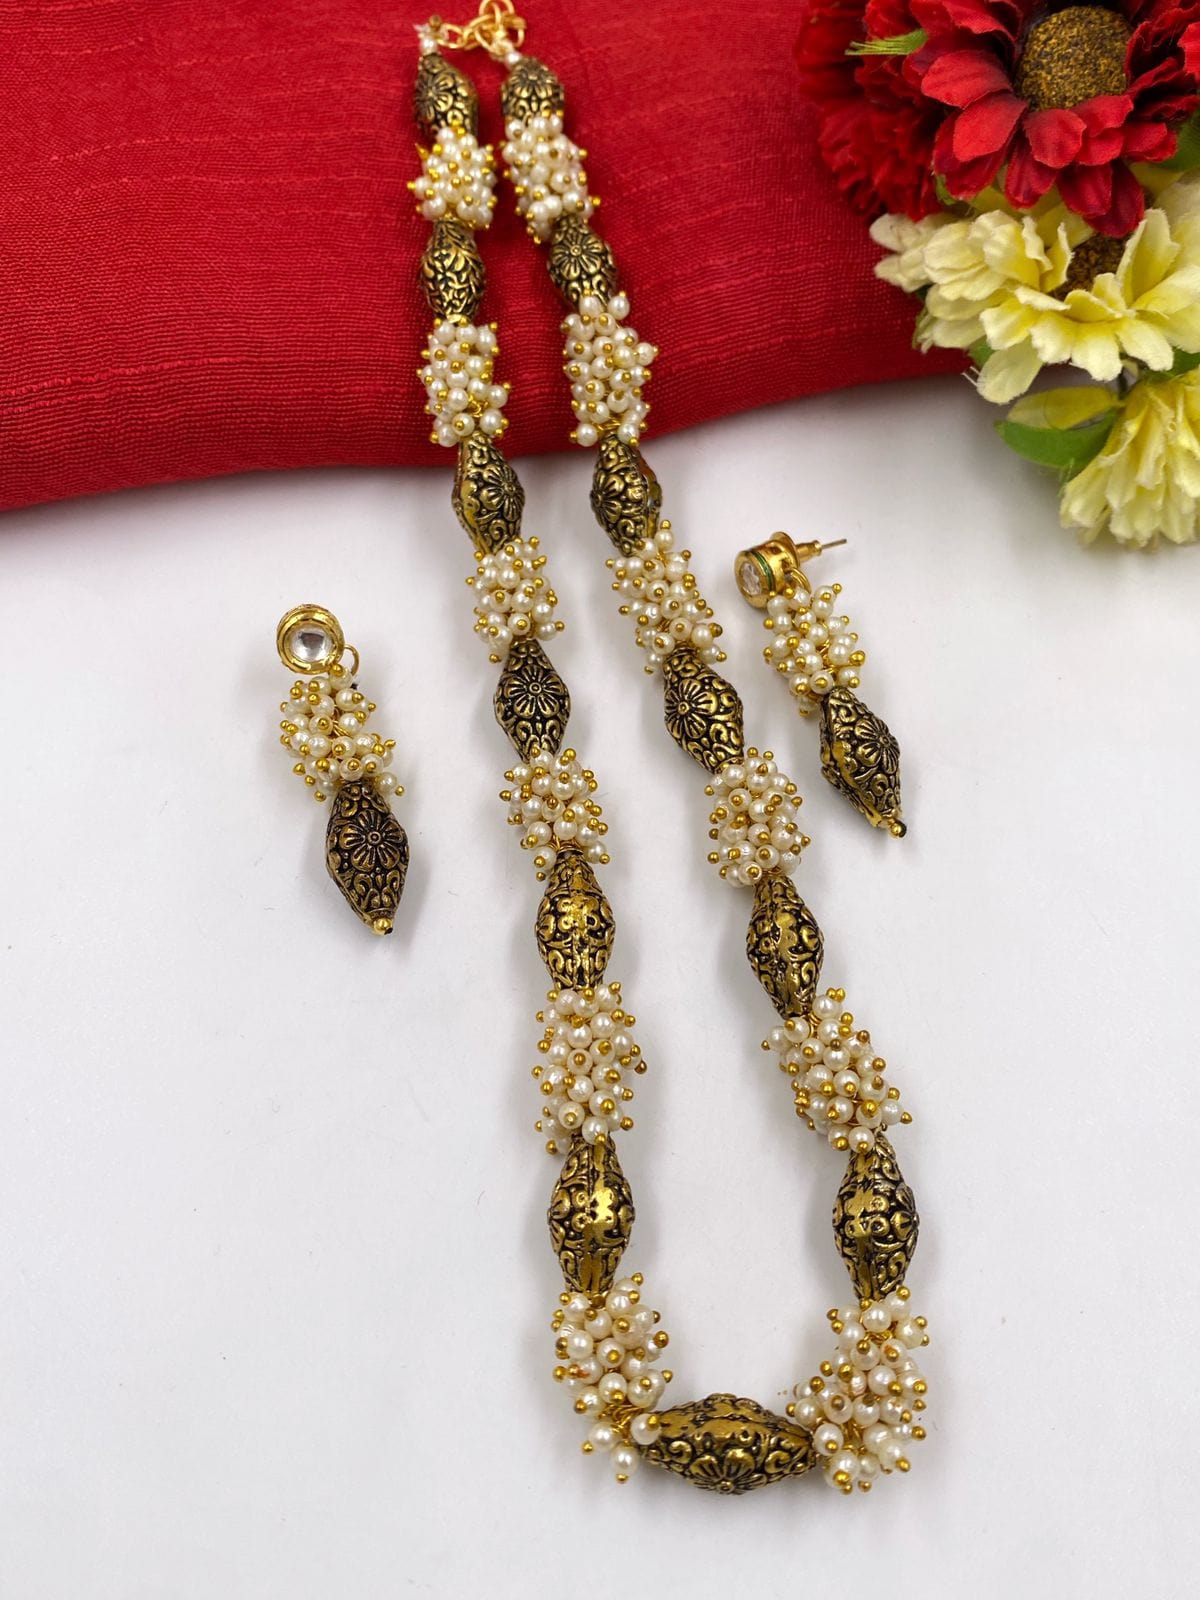 Fancy Handcrafted Antique Pearl Beads Necklace By Gehna Shop Beads Jewellery